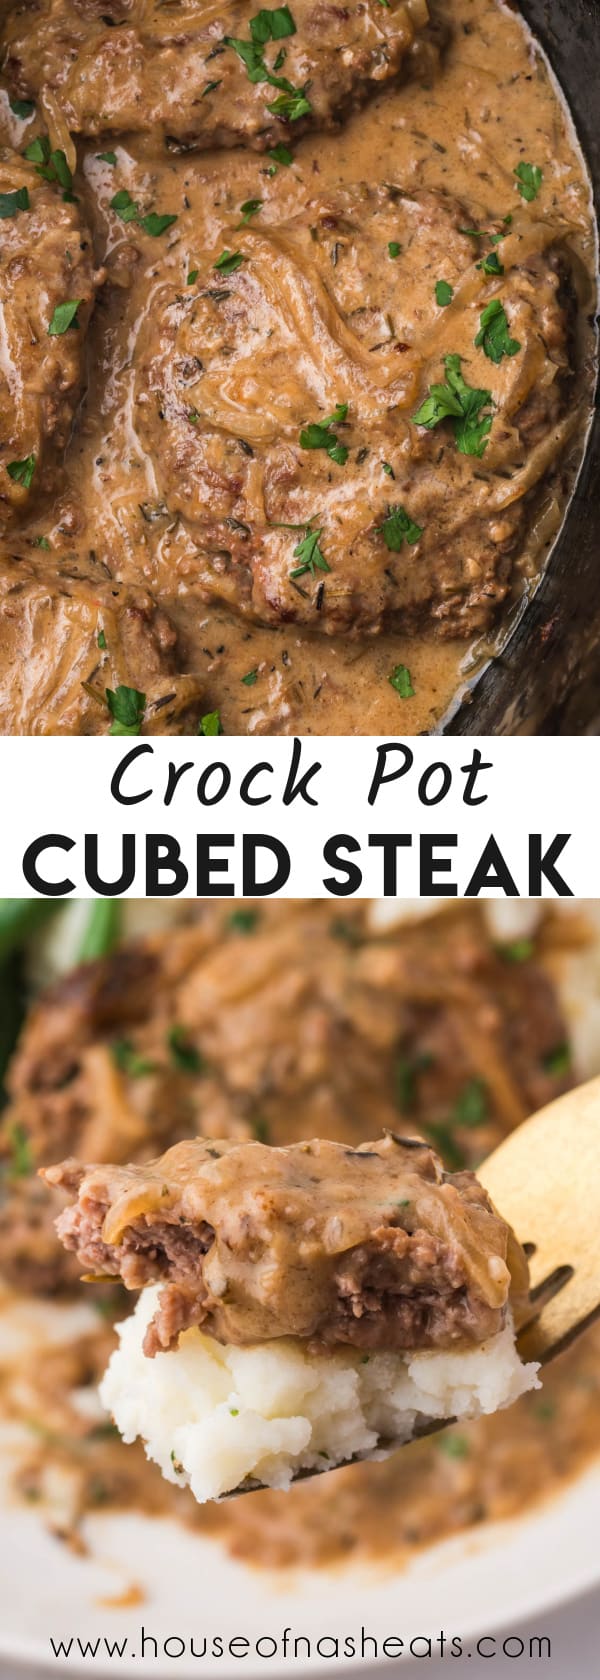 A collage of images of crock pot cubed steak with text overlay.